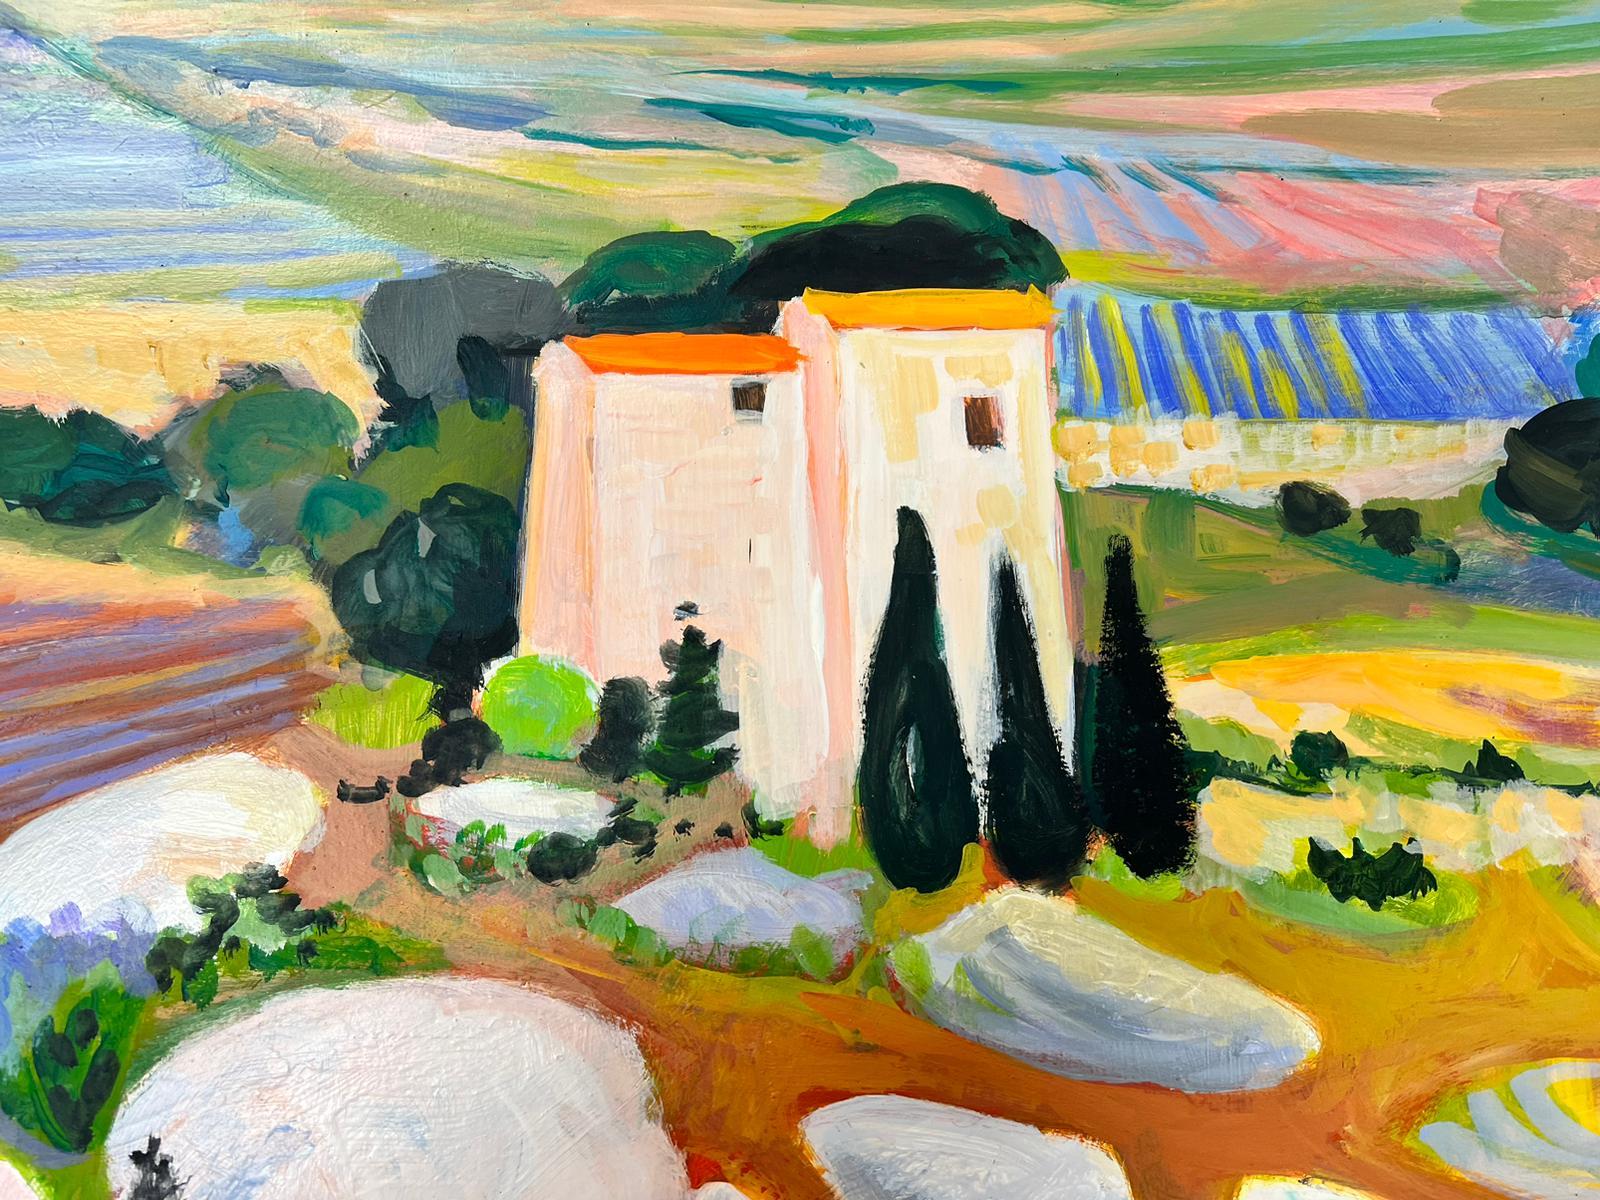 Contemporary French Modernist Oil Lavender Fields & House in Provence Landscape - Painting by Huguette Ginet-Lasnier 